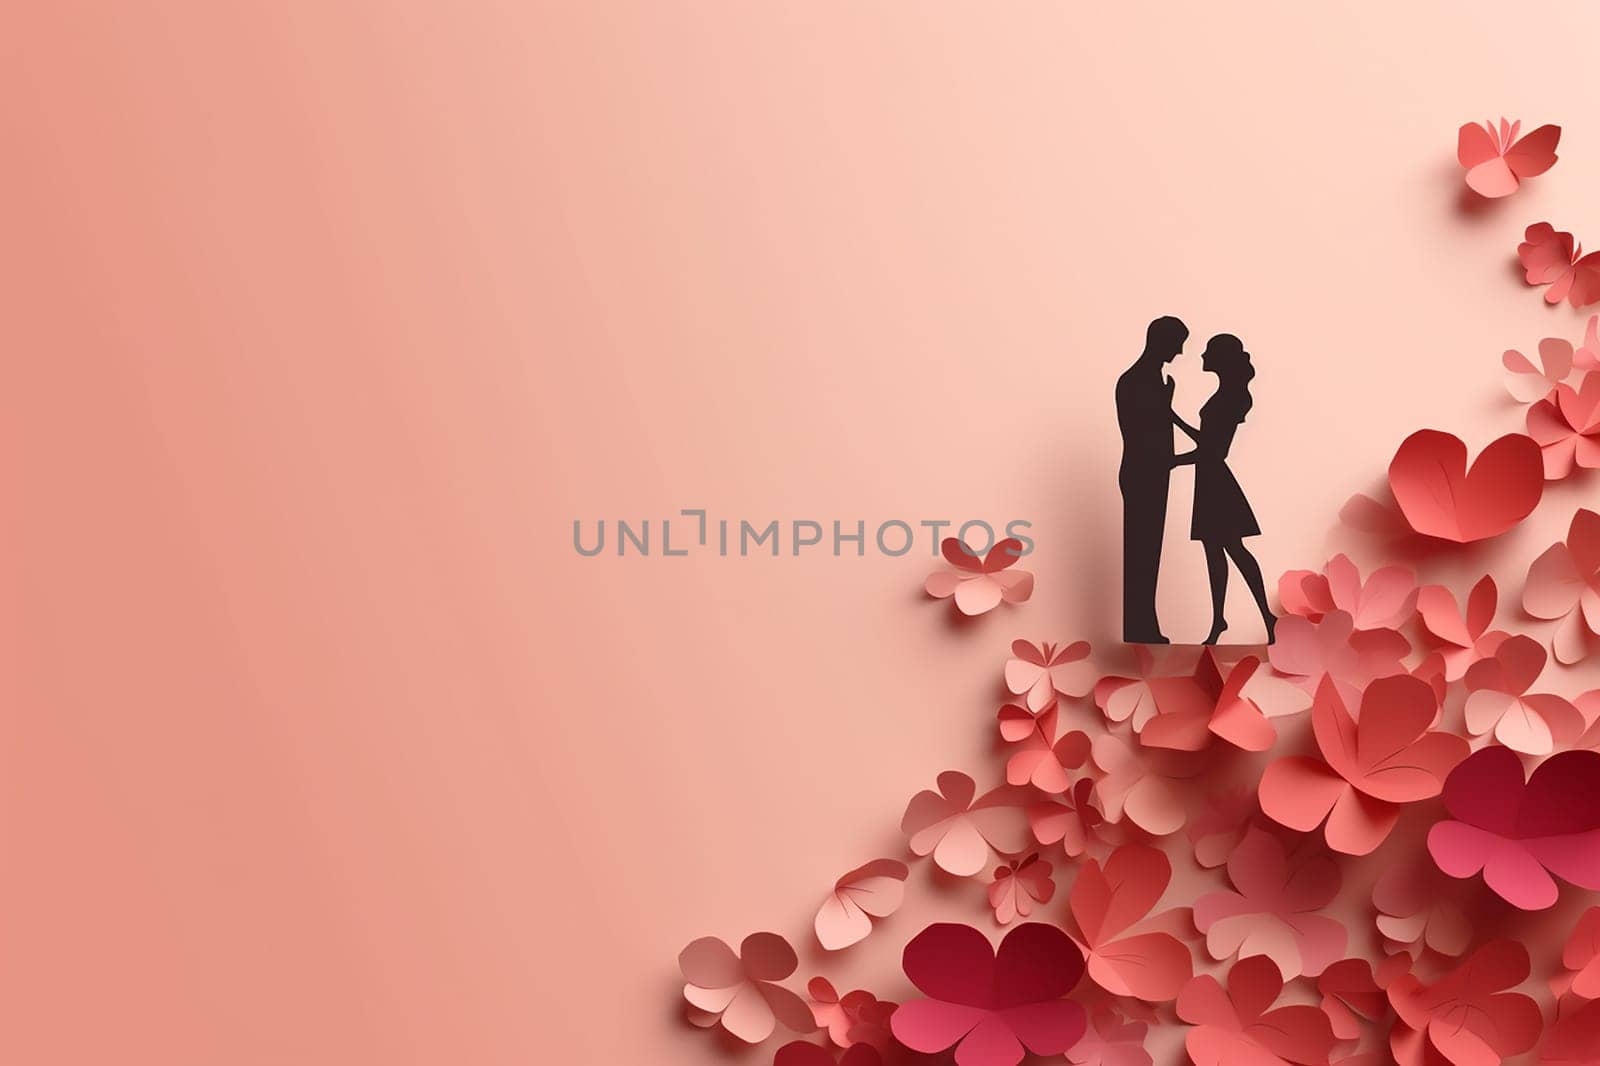 Silhouette of a couple surrounded by paper hearts on a pink background